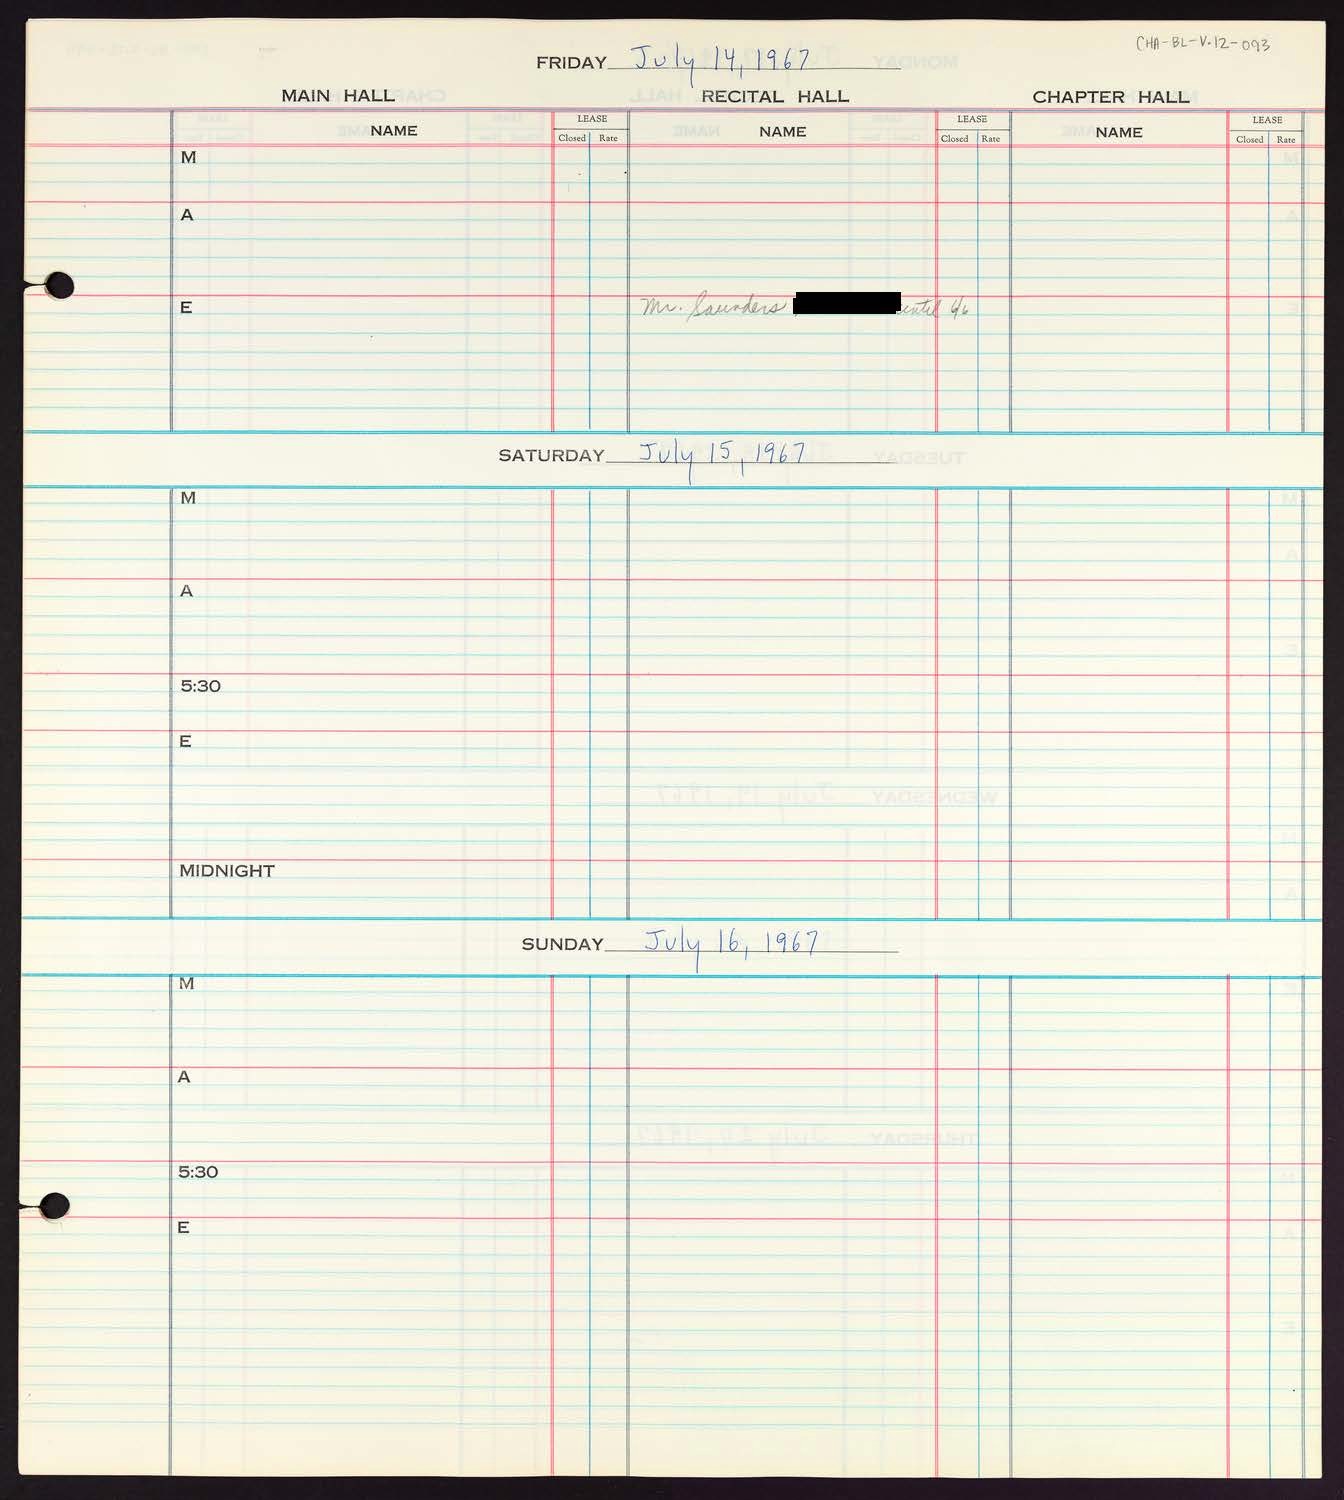 Carnegie Hall Booking Ledger, volume 12, page 93